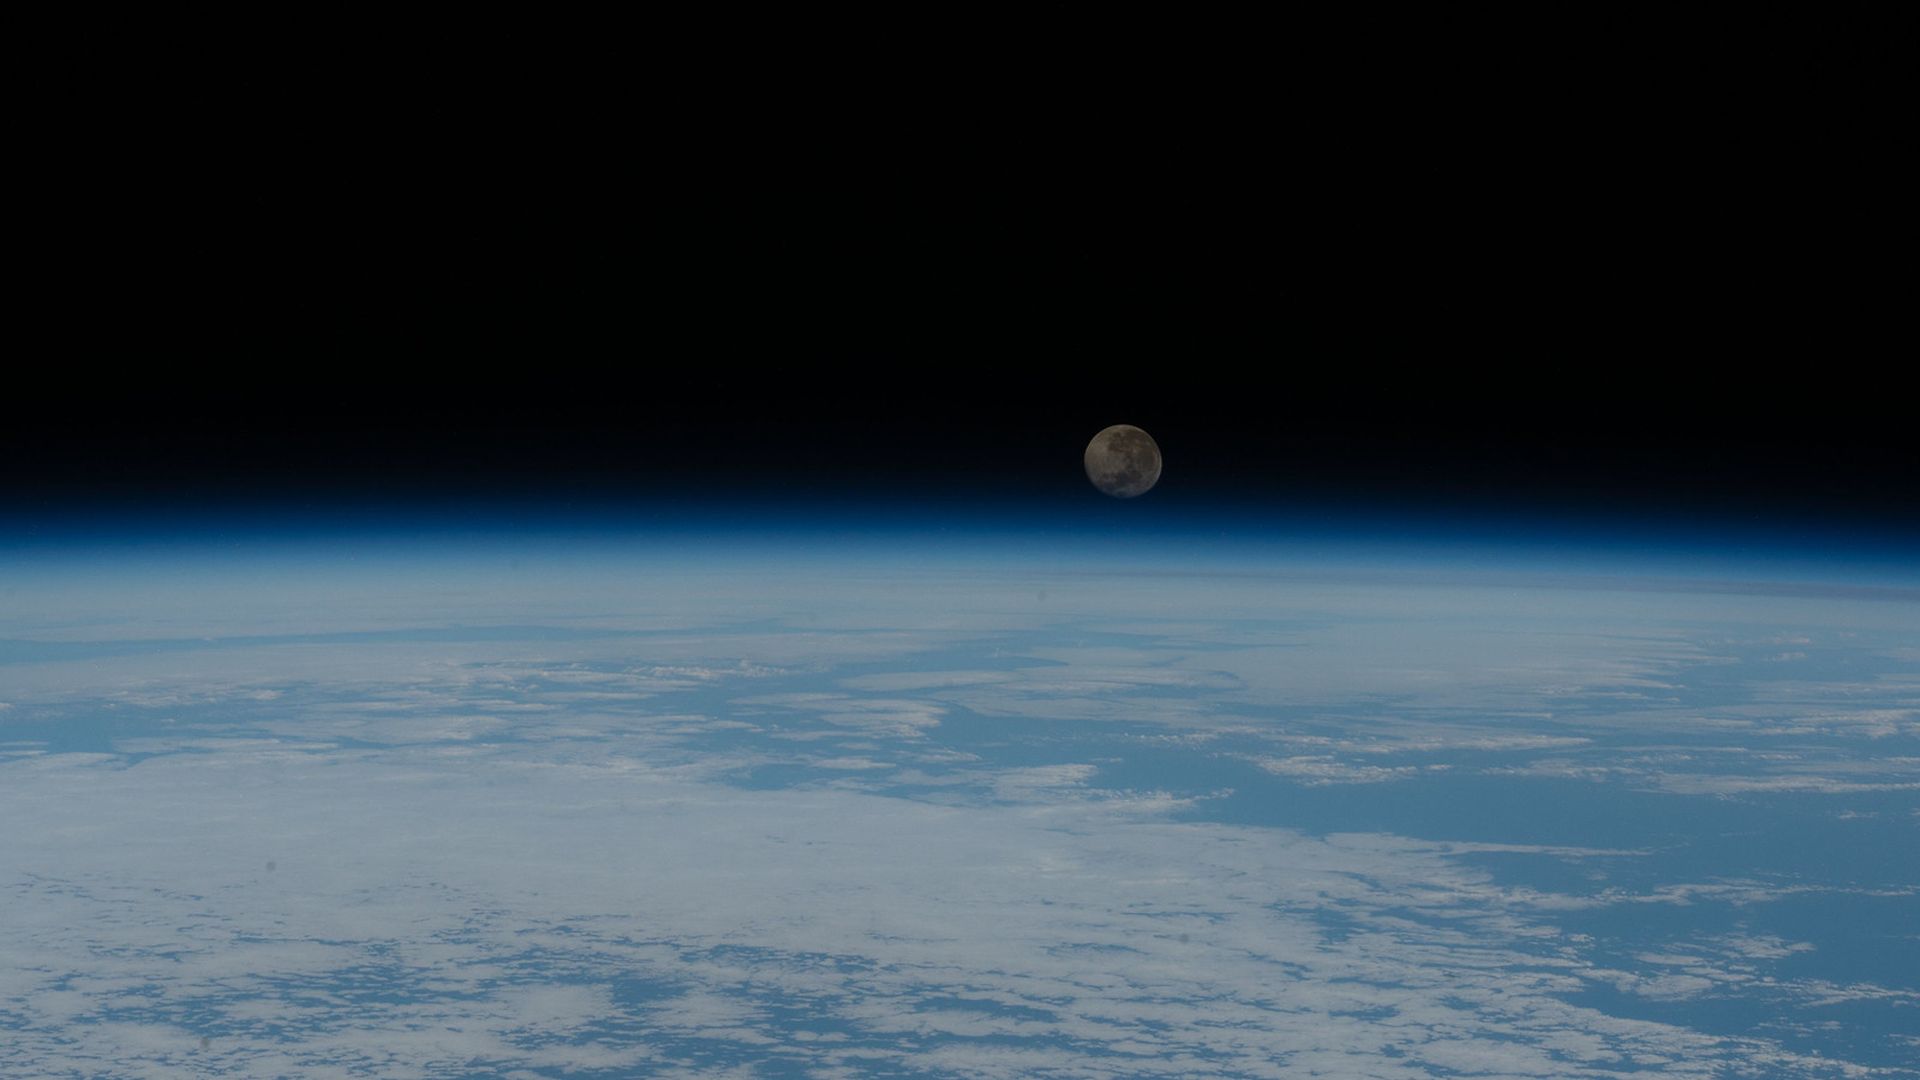 The Moon above the limb of the Earth as seen from the International Space Station